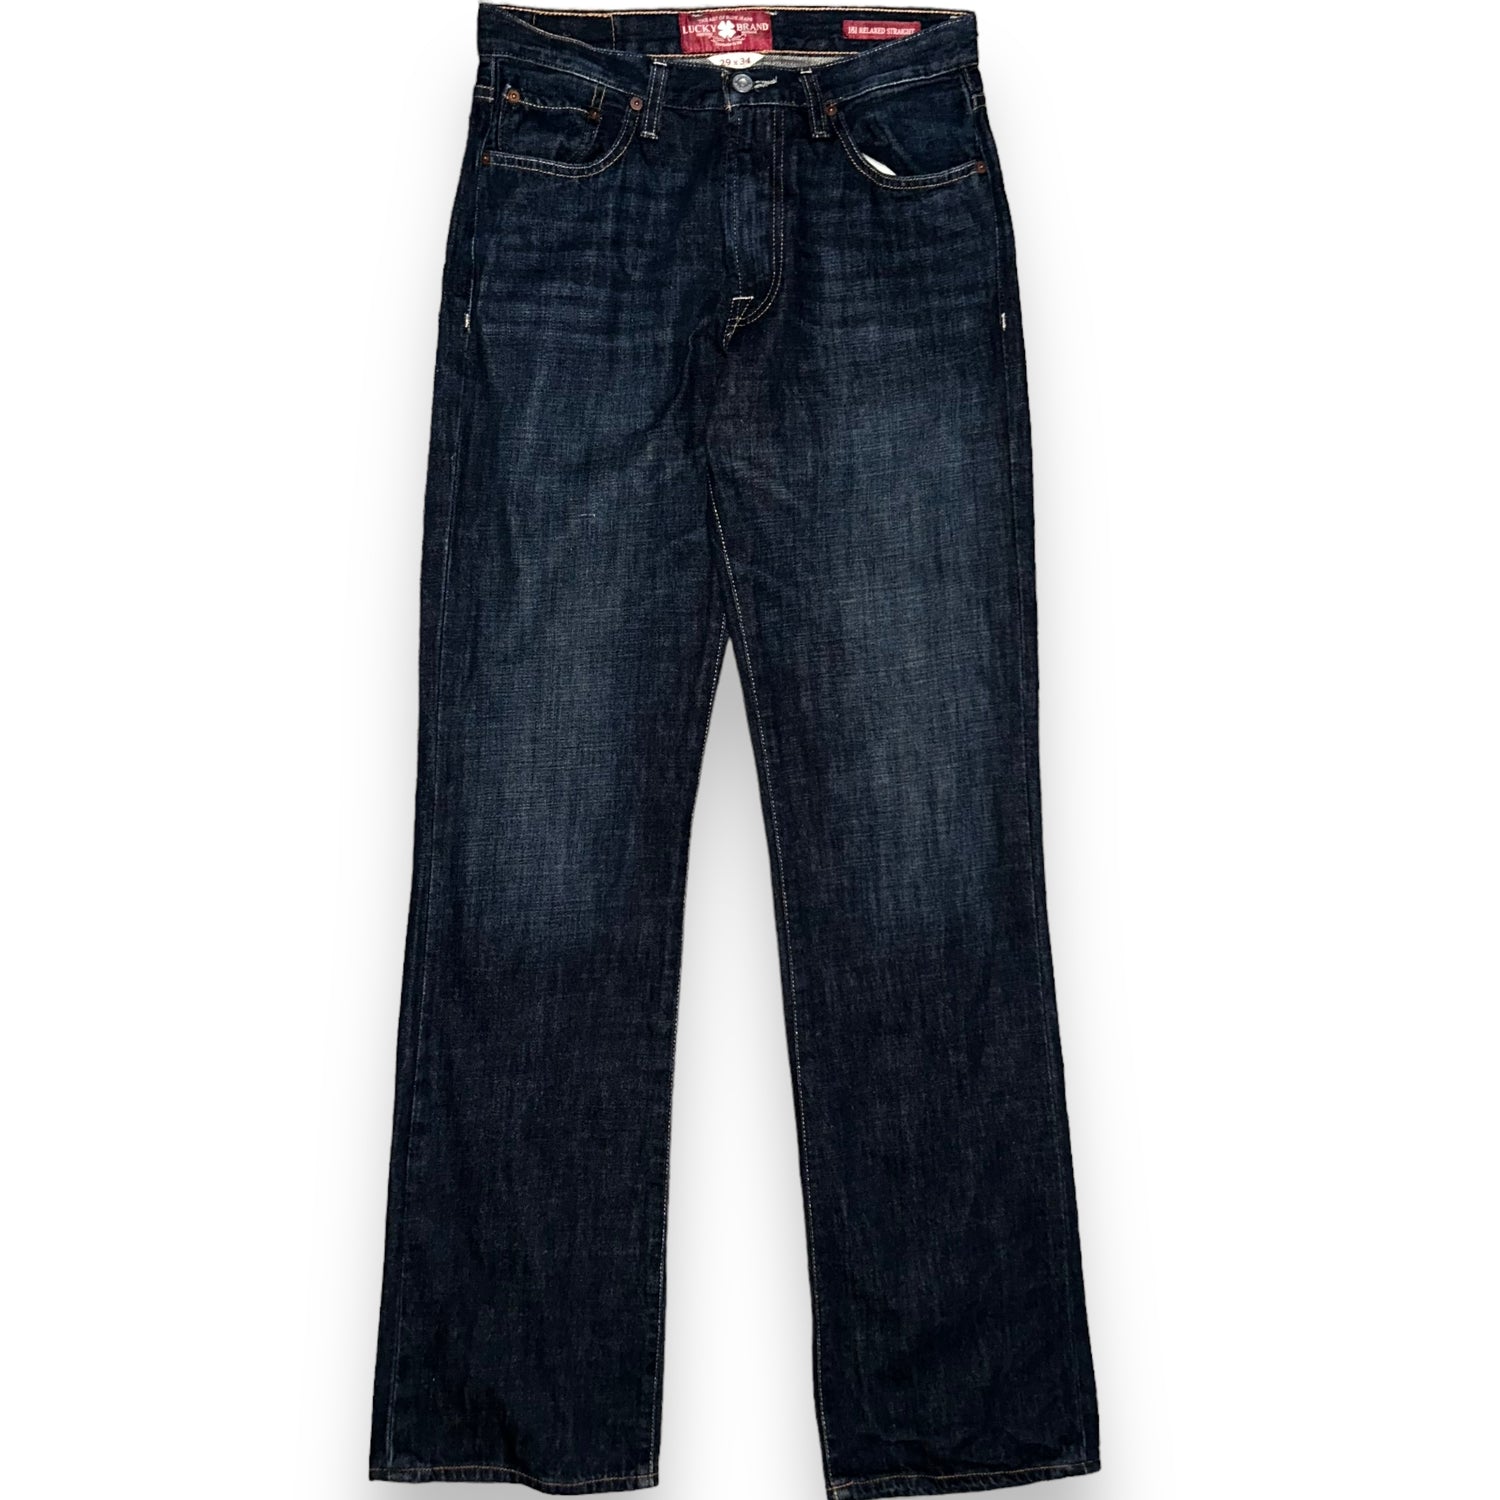 Lucky Brand Vintage Jeans (30 US S)